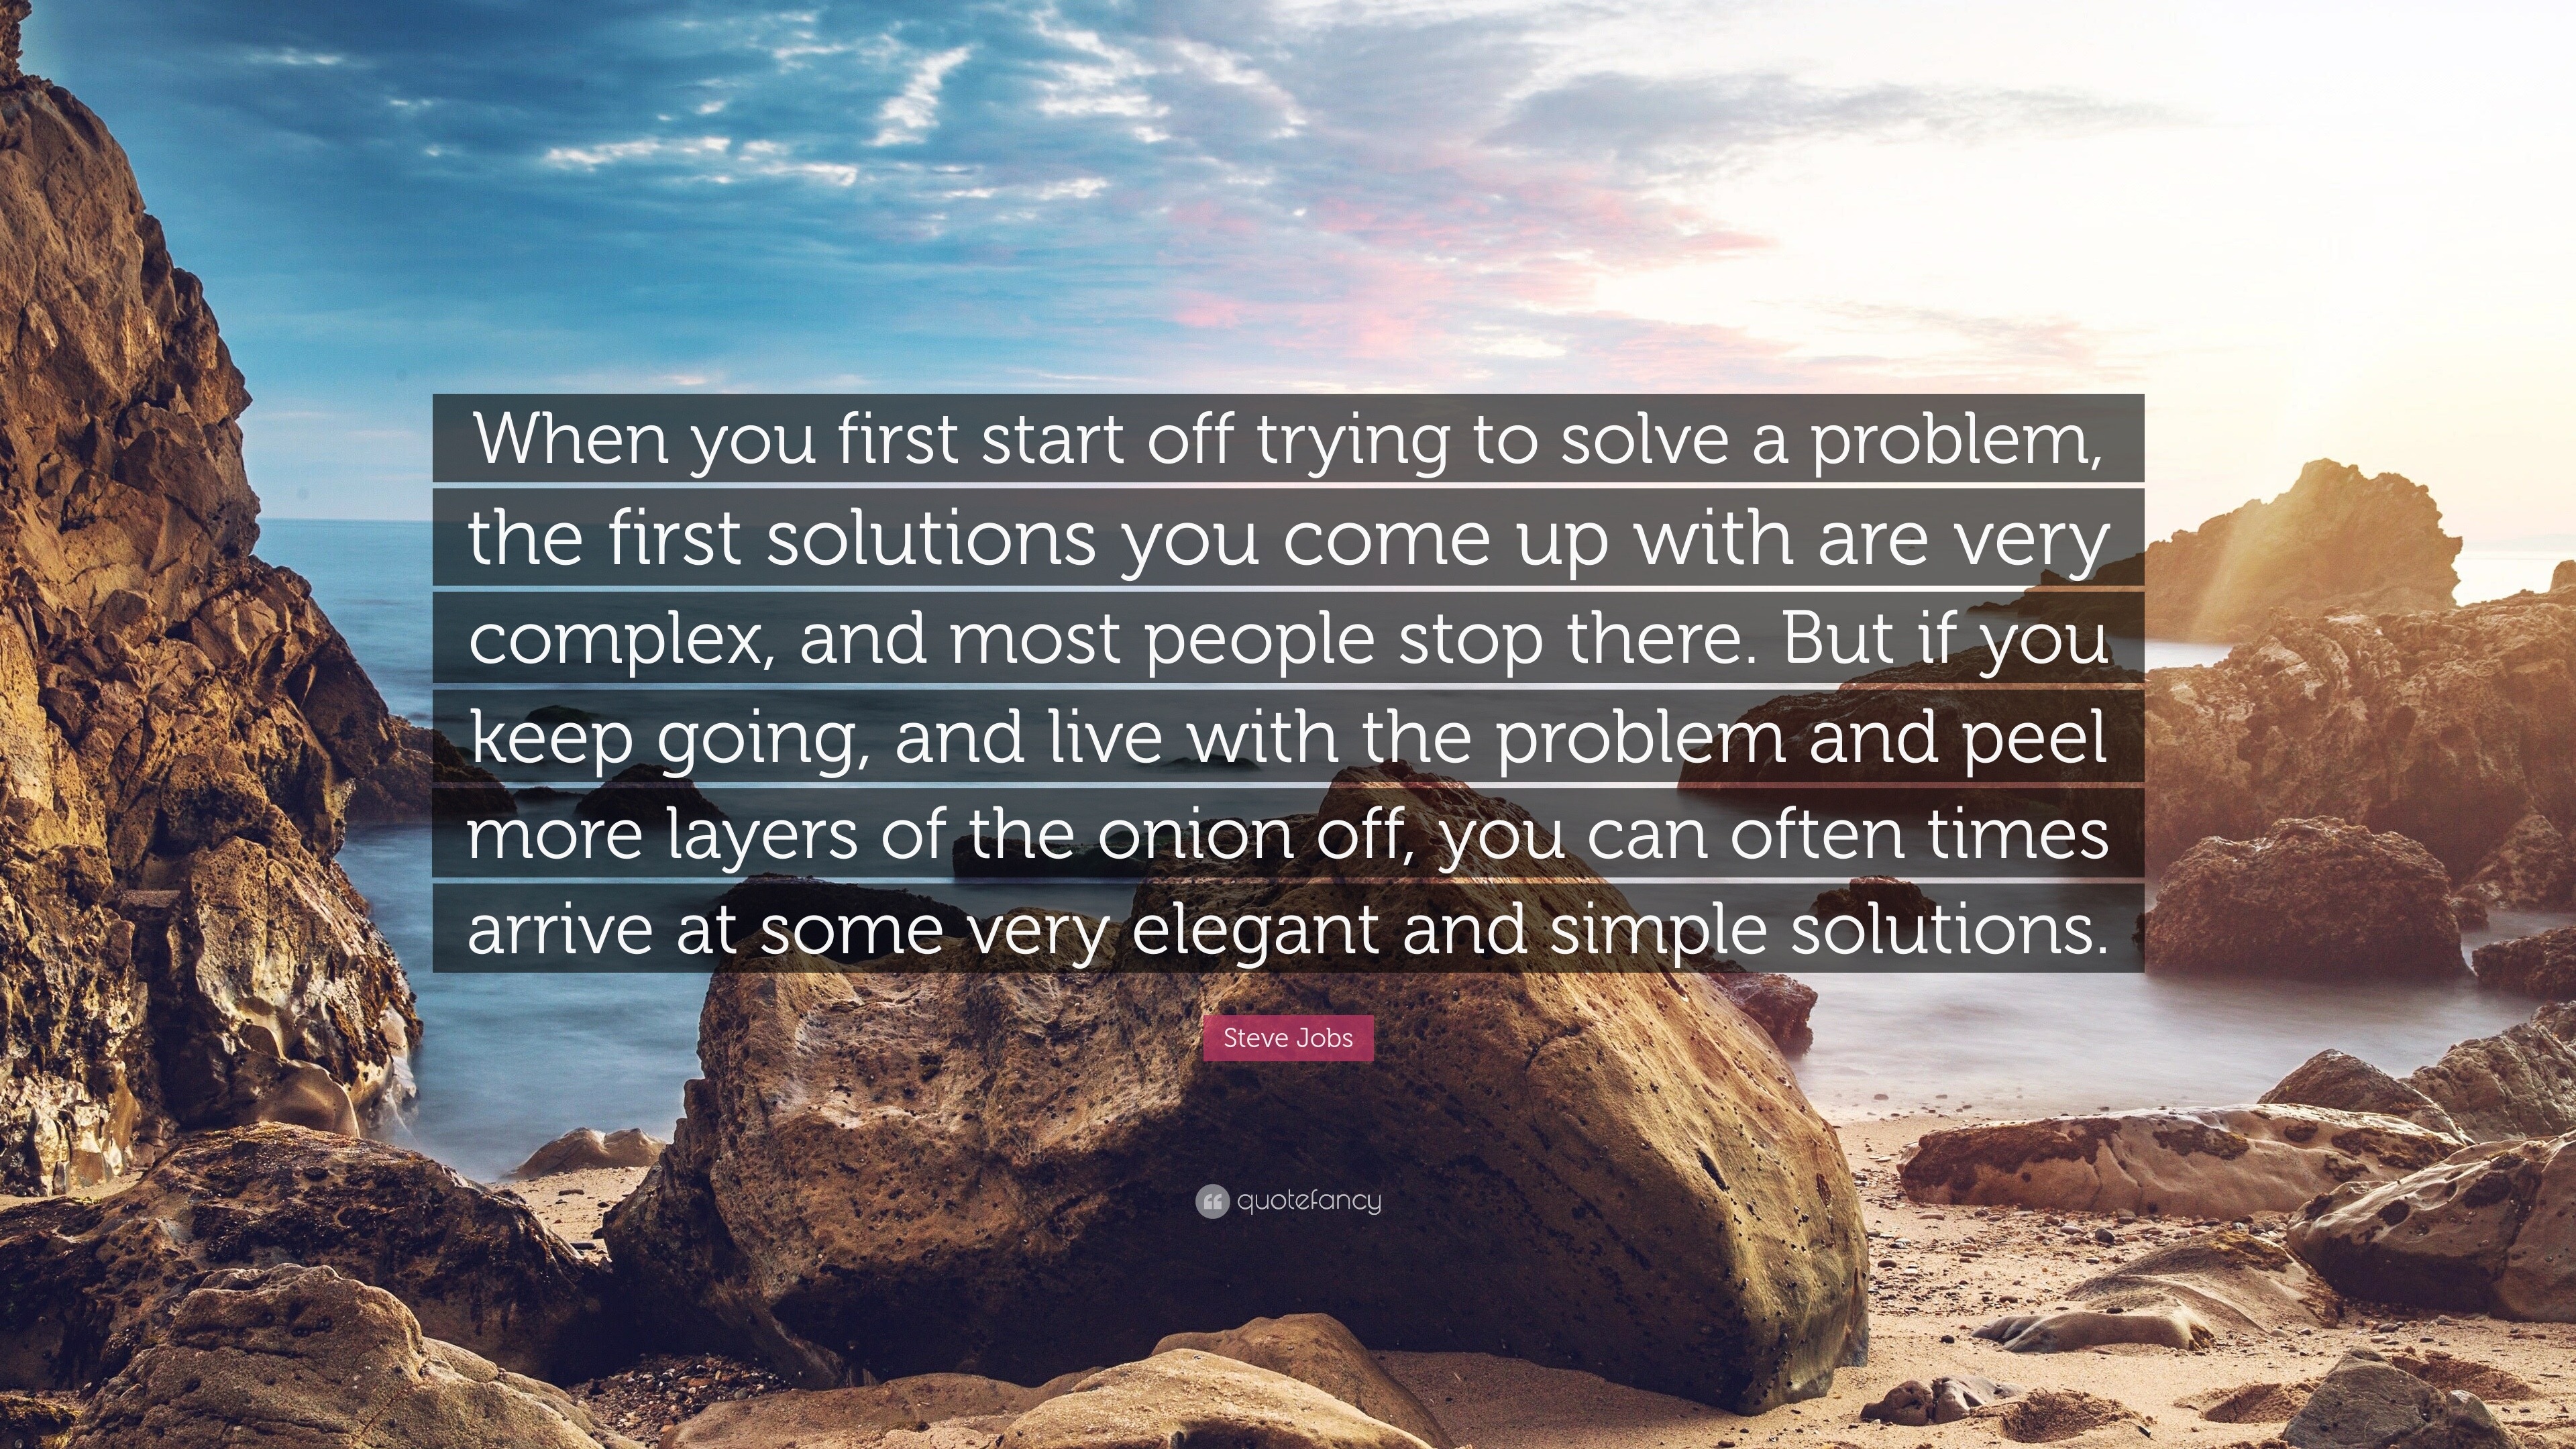 Steve Jobs Quote: “When you first start off trying to solve a problem, the first solutions you come up with are very complex, and most peop...”